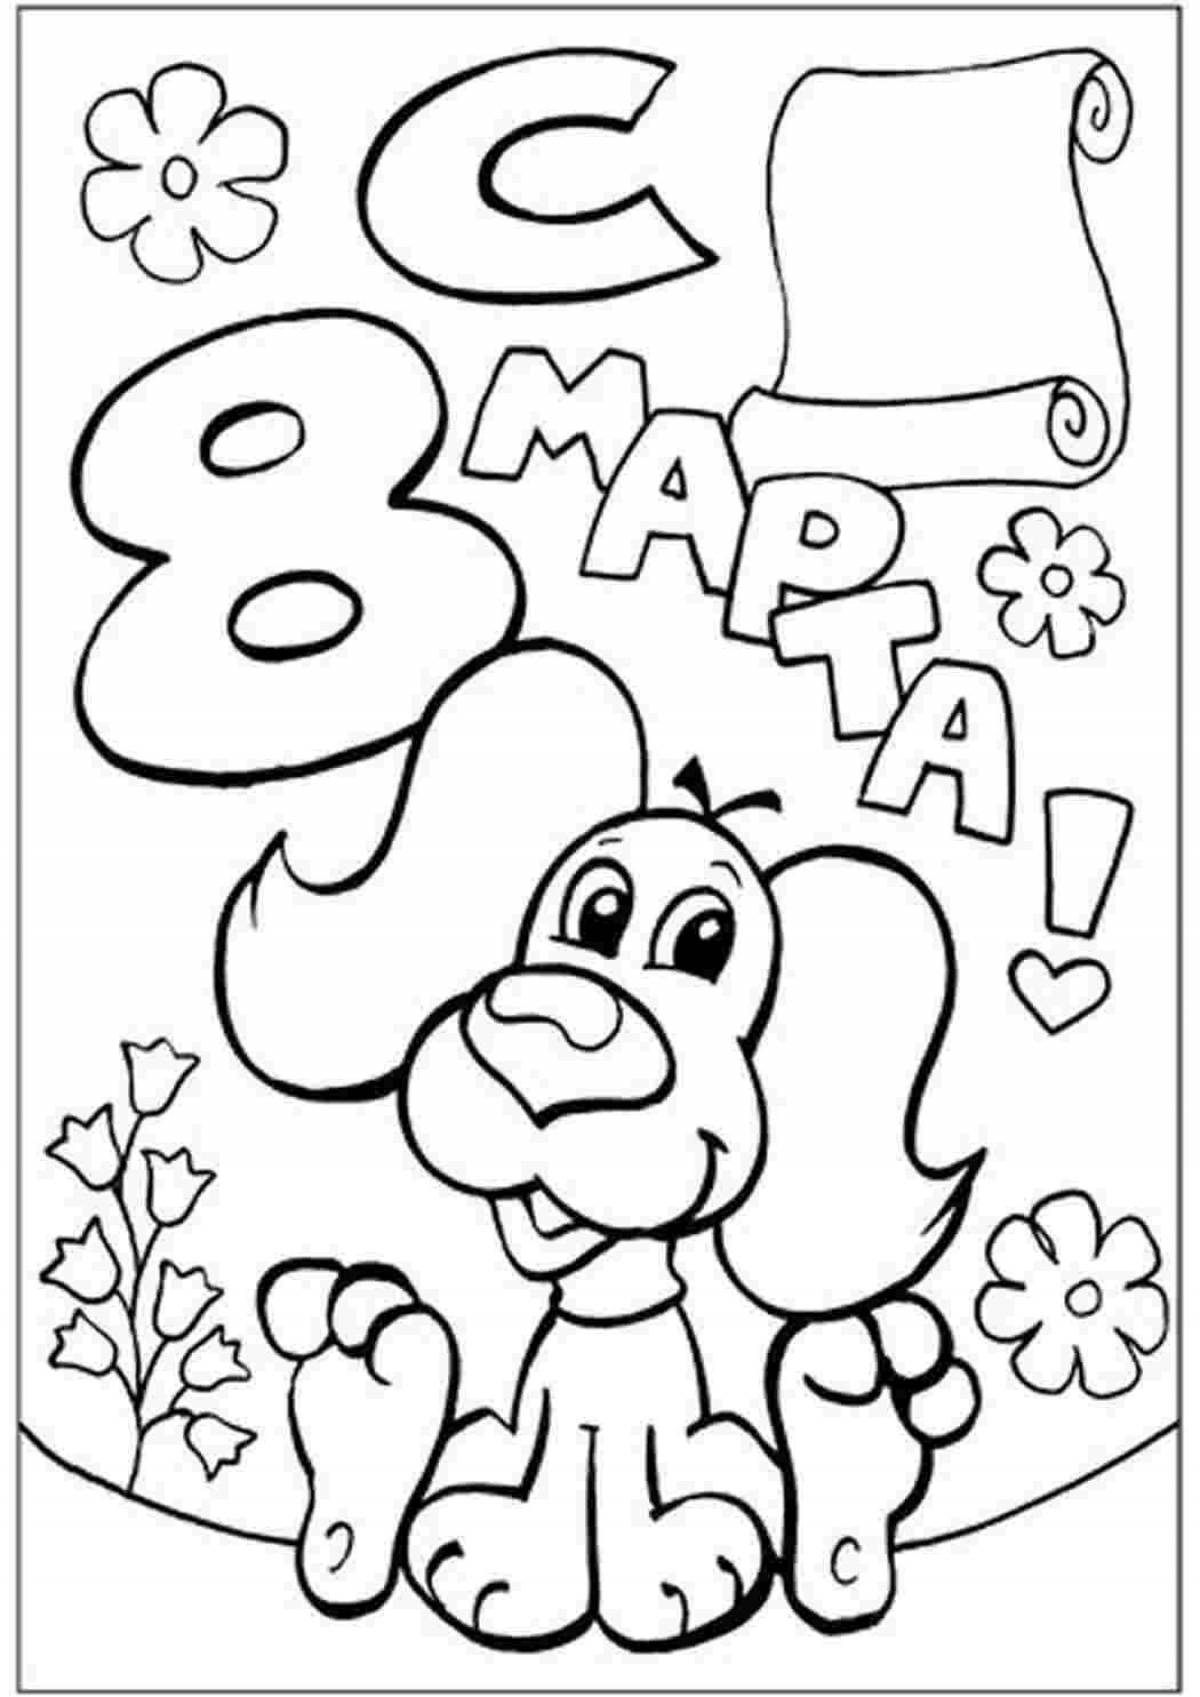 Charming March 8 coloring book for kids 3-4 years old